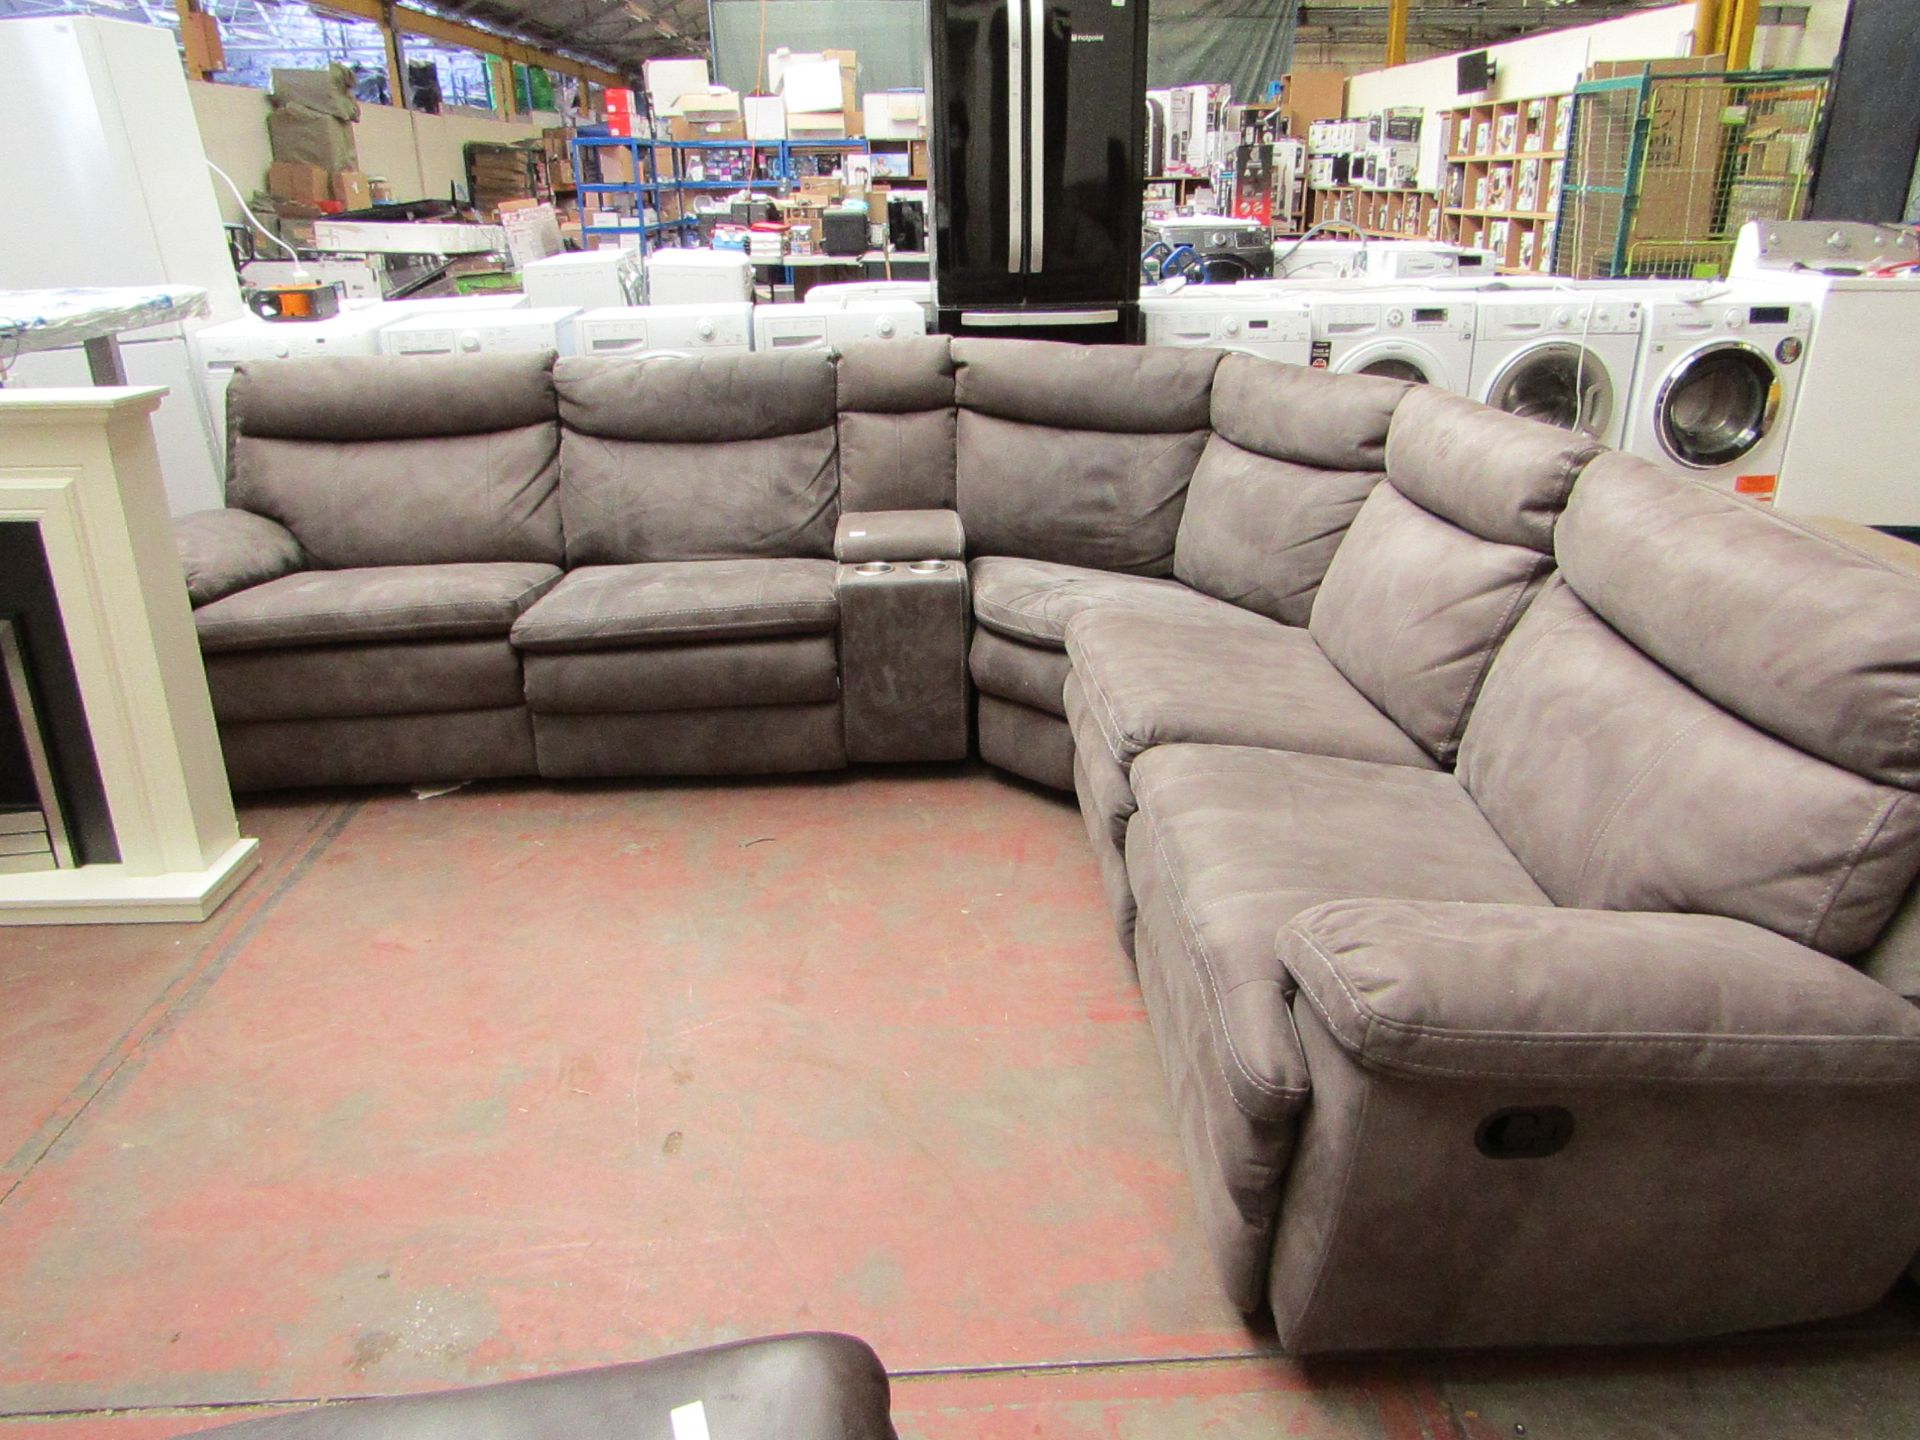 Kuka Cinema Sofa with 3 manual reclining parts, a Cup holder piece with storage, all reclining parts